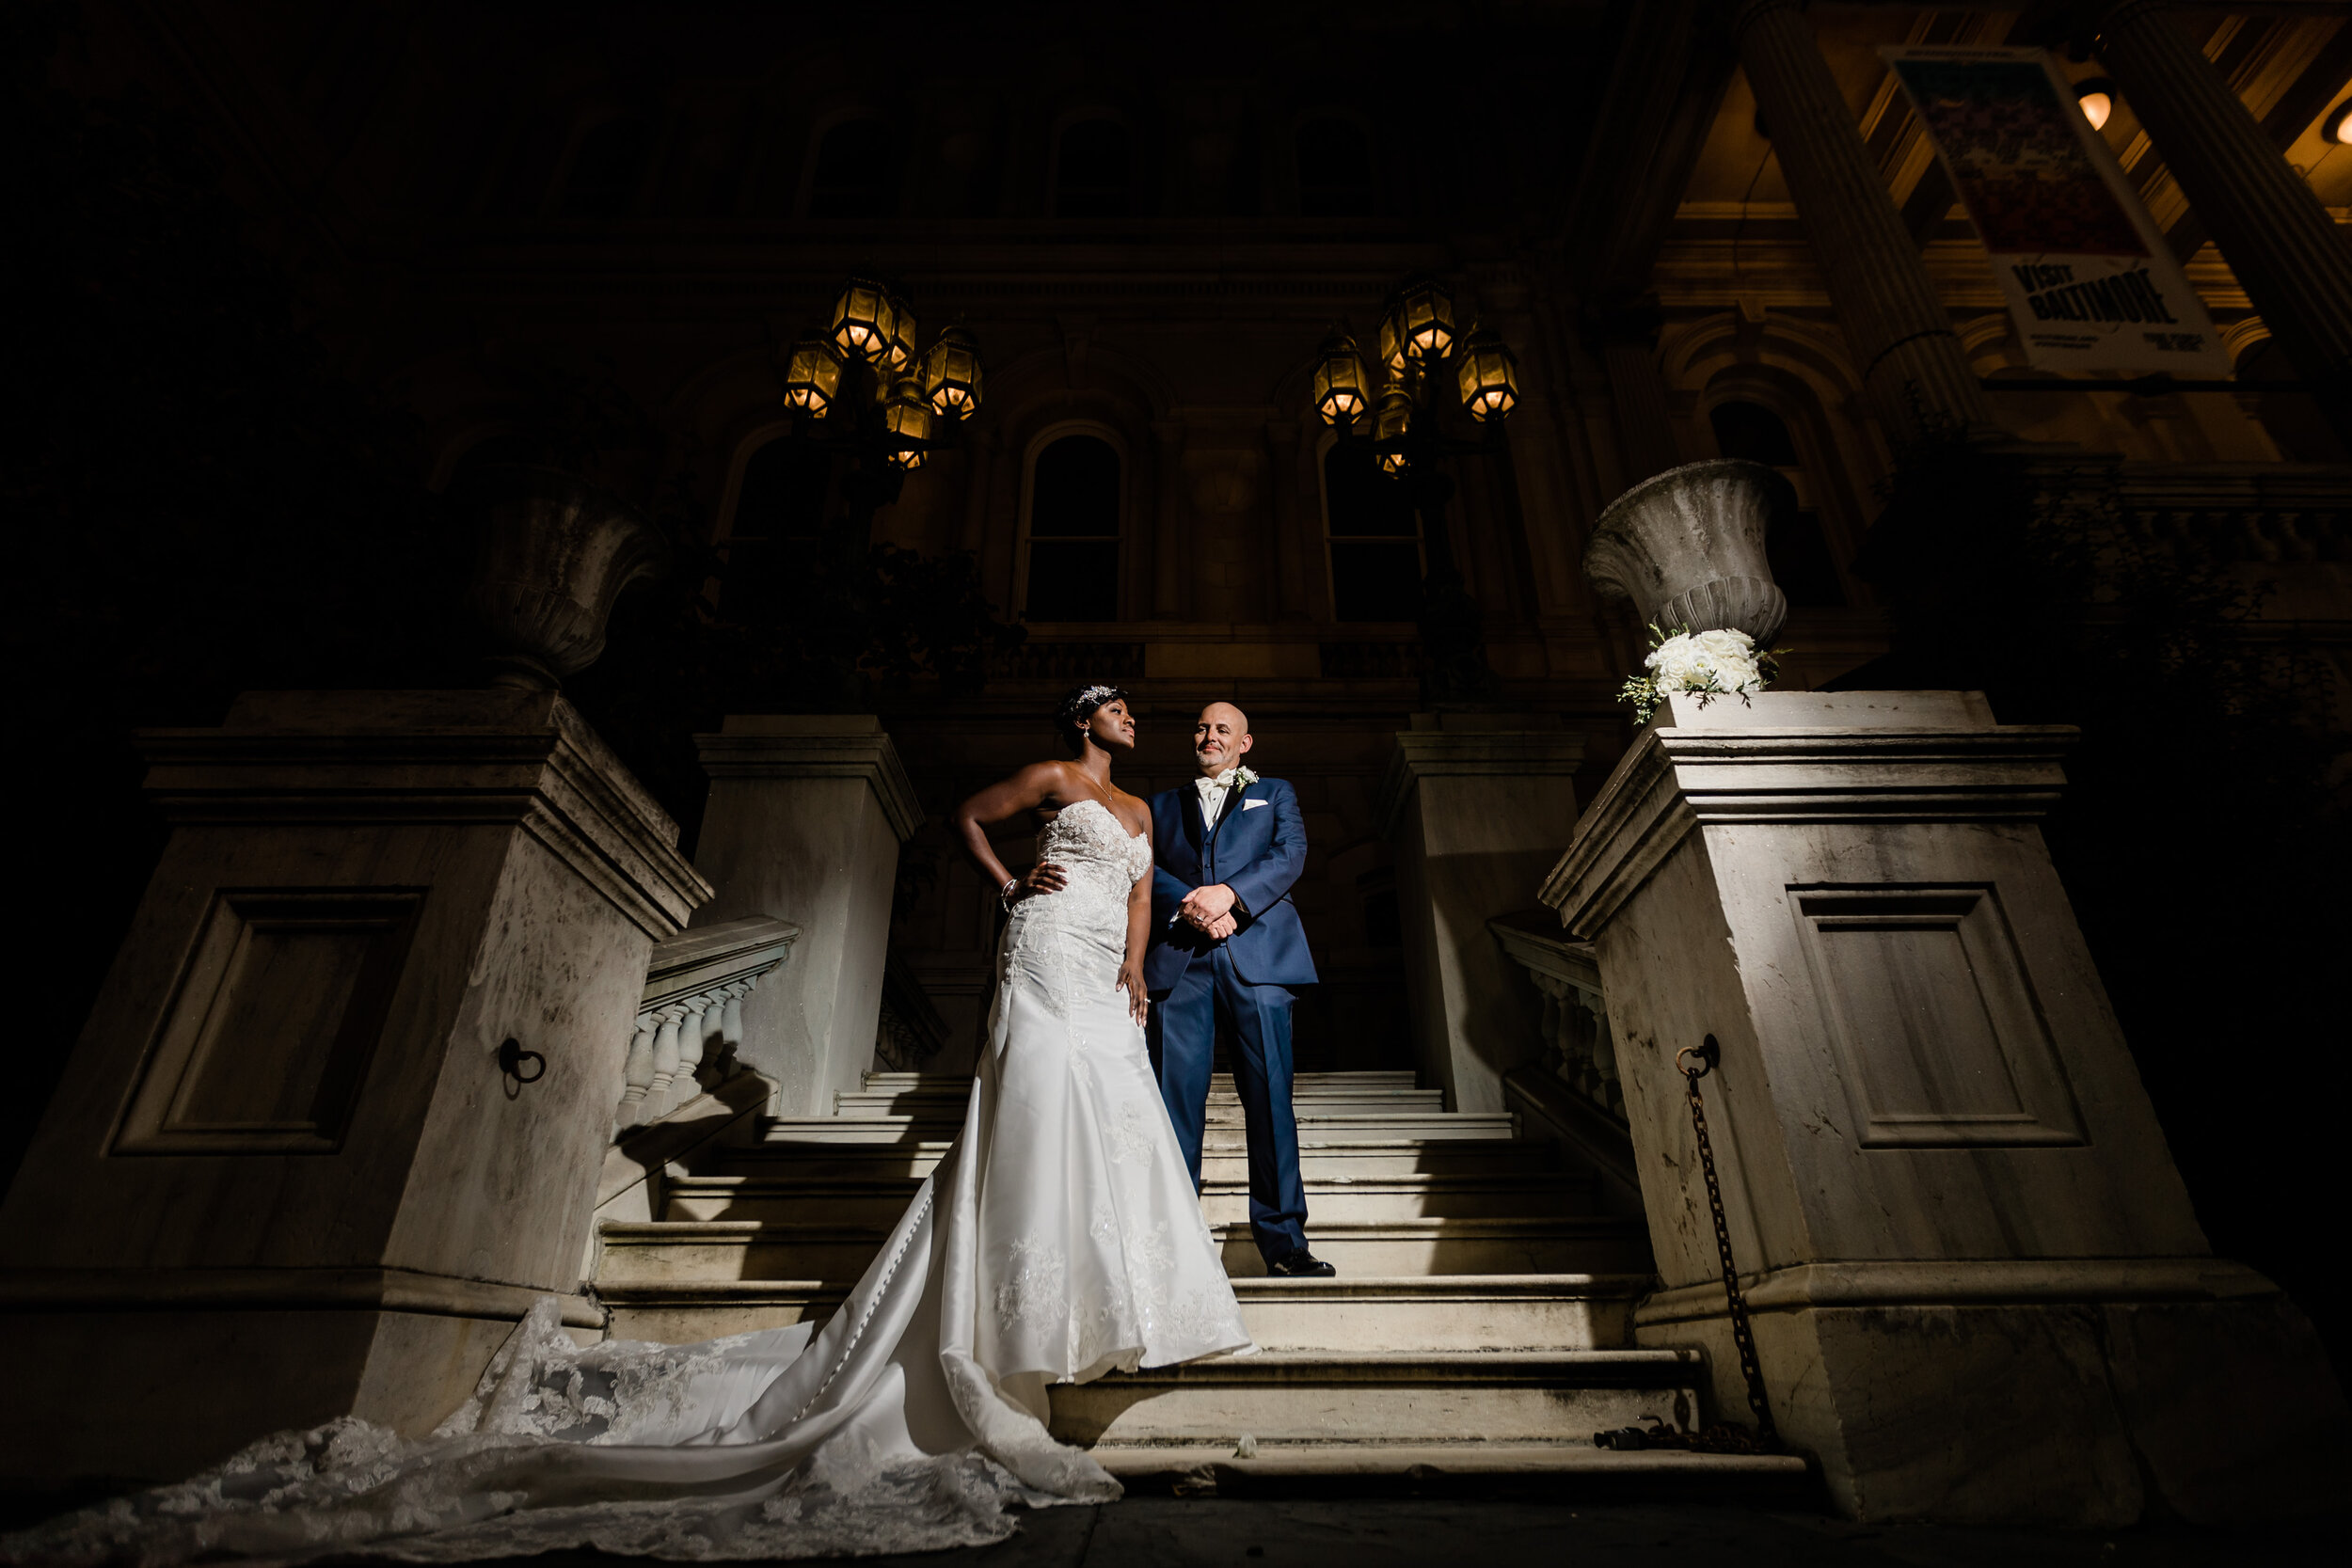 get married in baltimore city hall shot by megapixels media biracial couple wedding photographers maryland-92.jpg